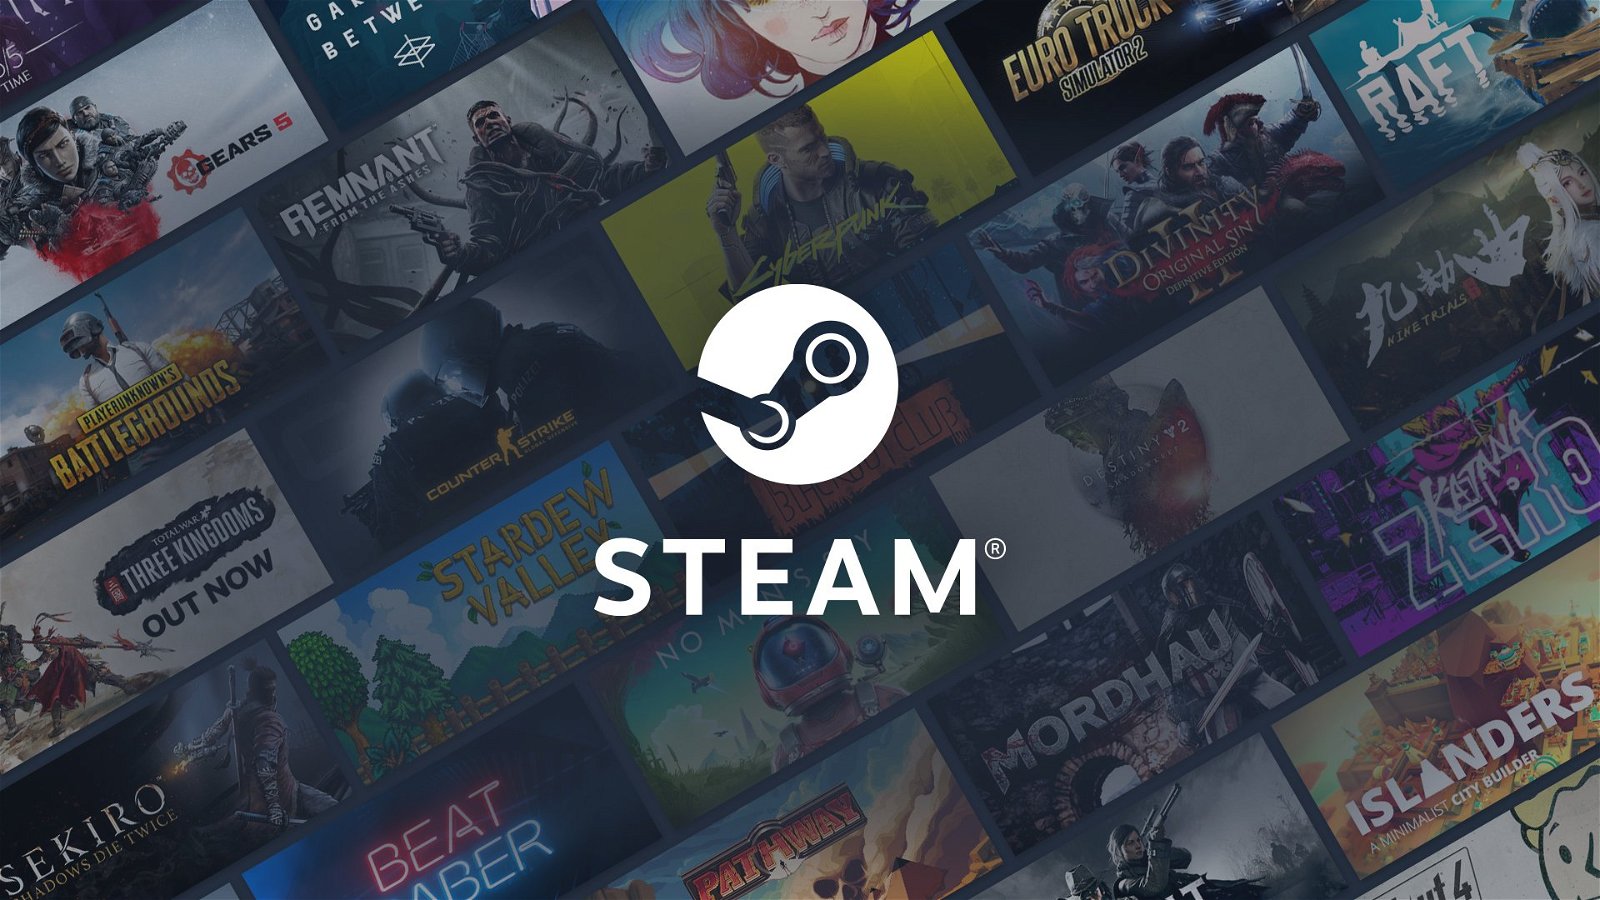 How To Download Steam on PC, Steam Download